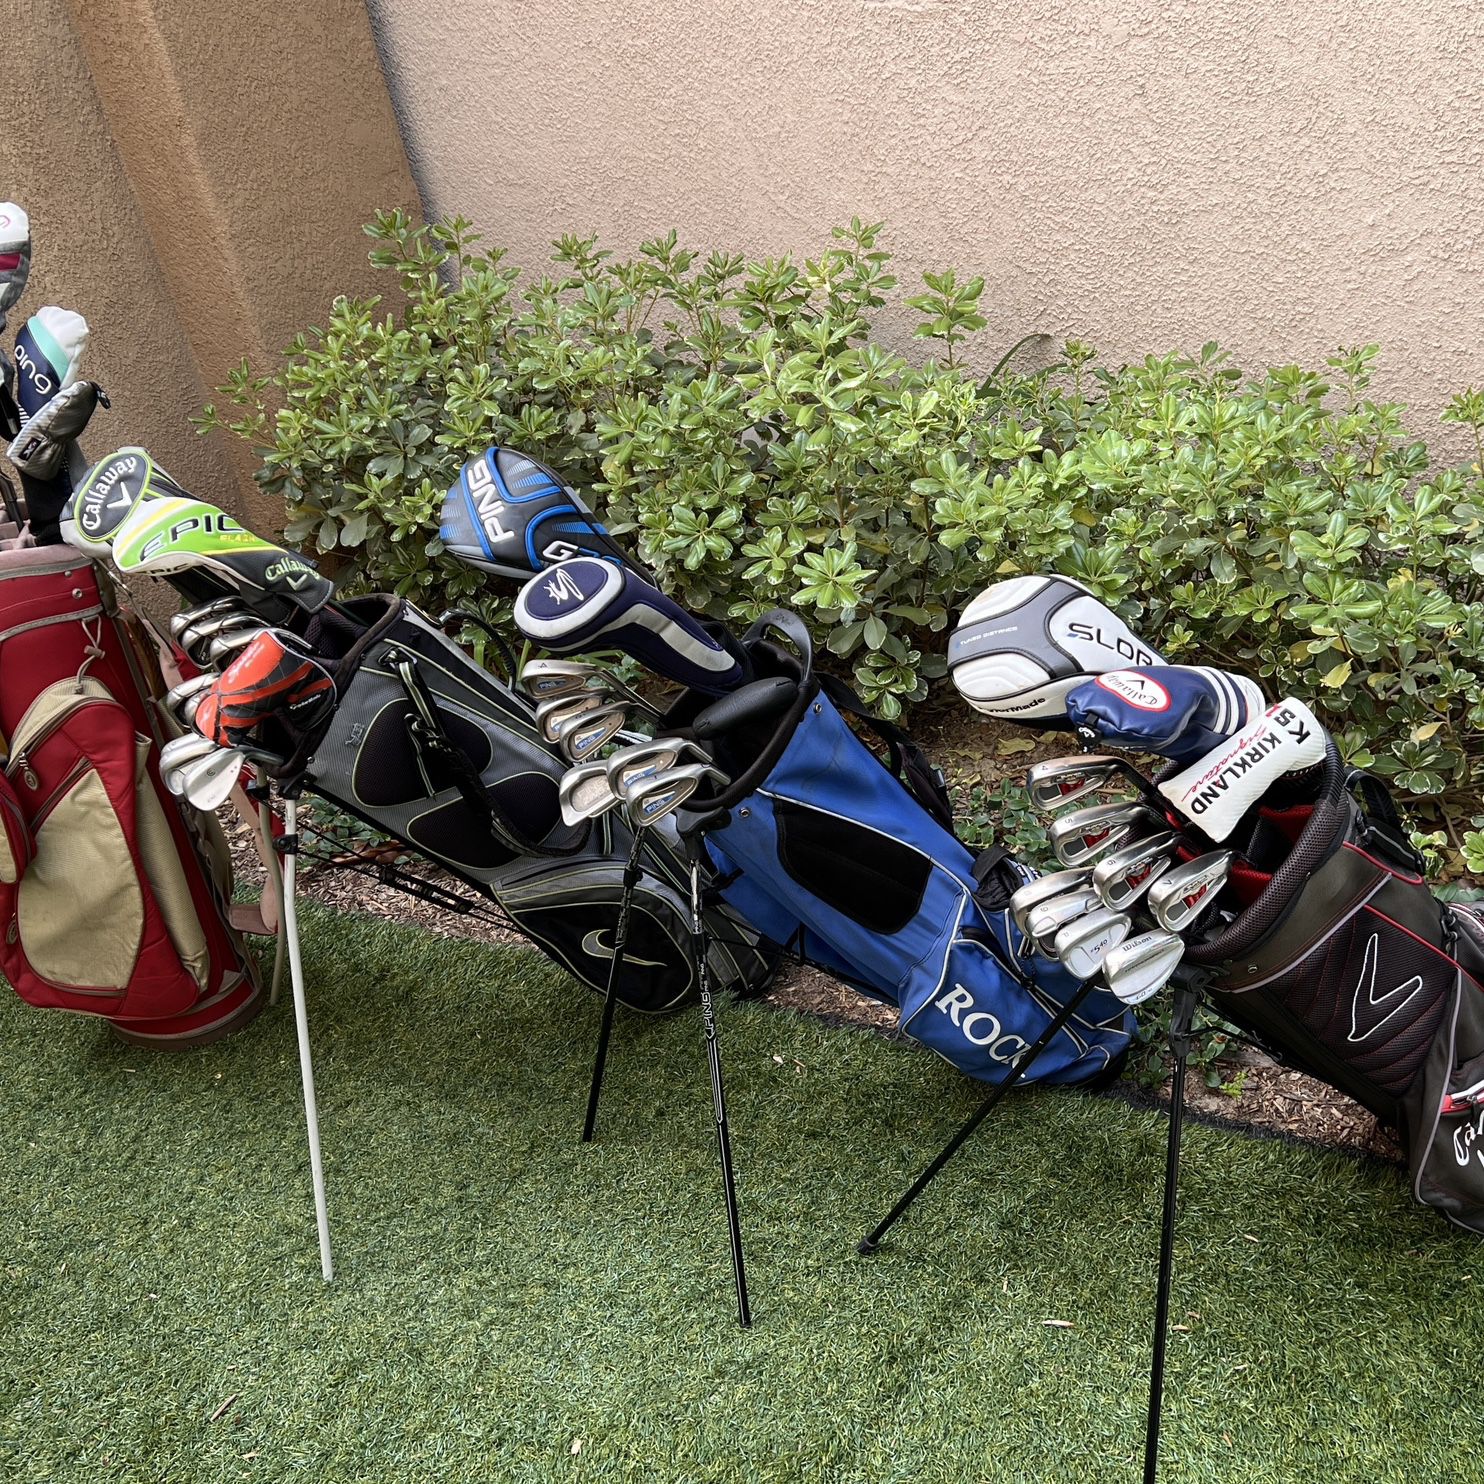 Golf Sets For Sale , Starting At 350 Women’s , Men’s Are $499 And Up Dm 4 Prices